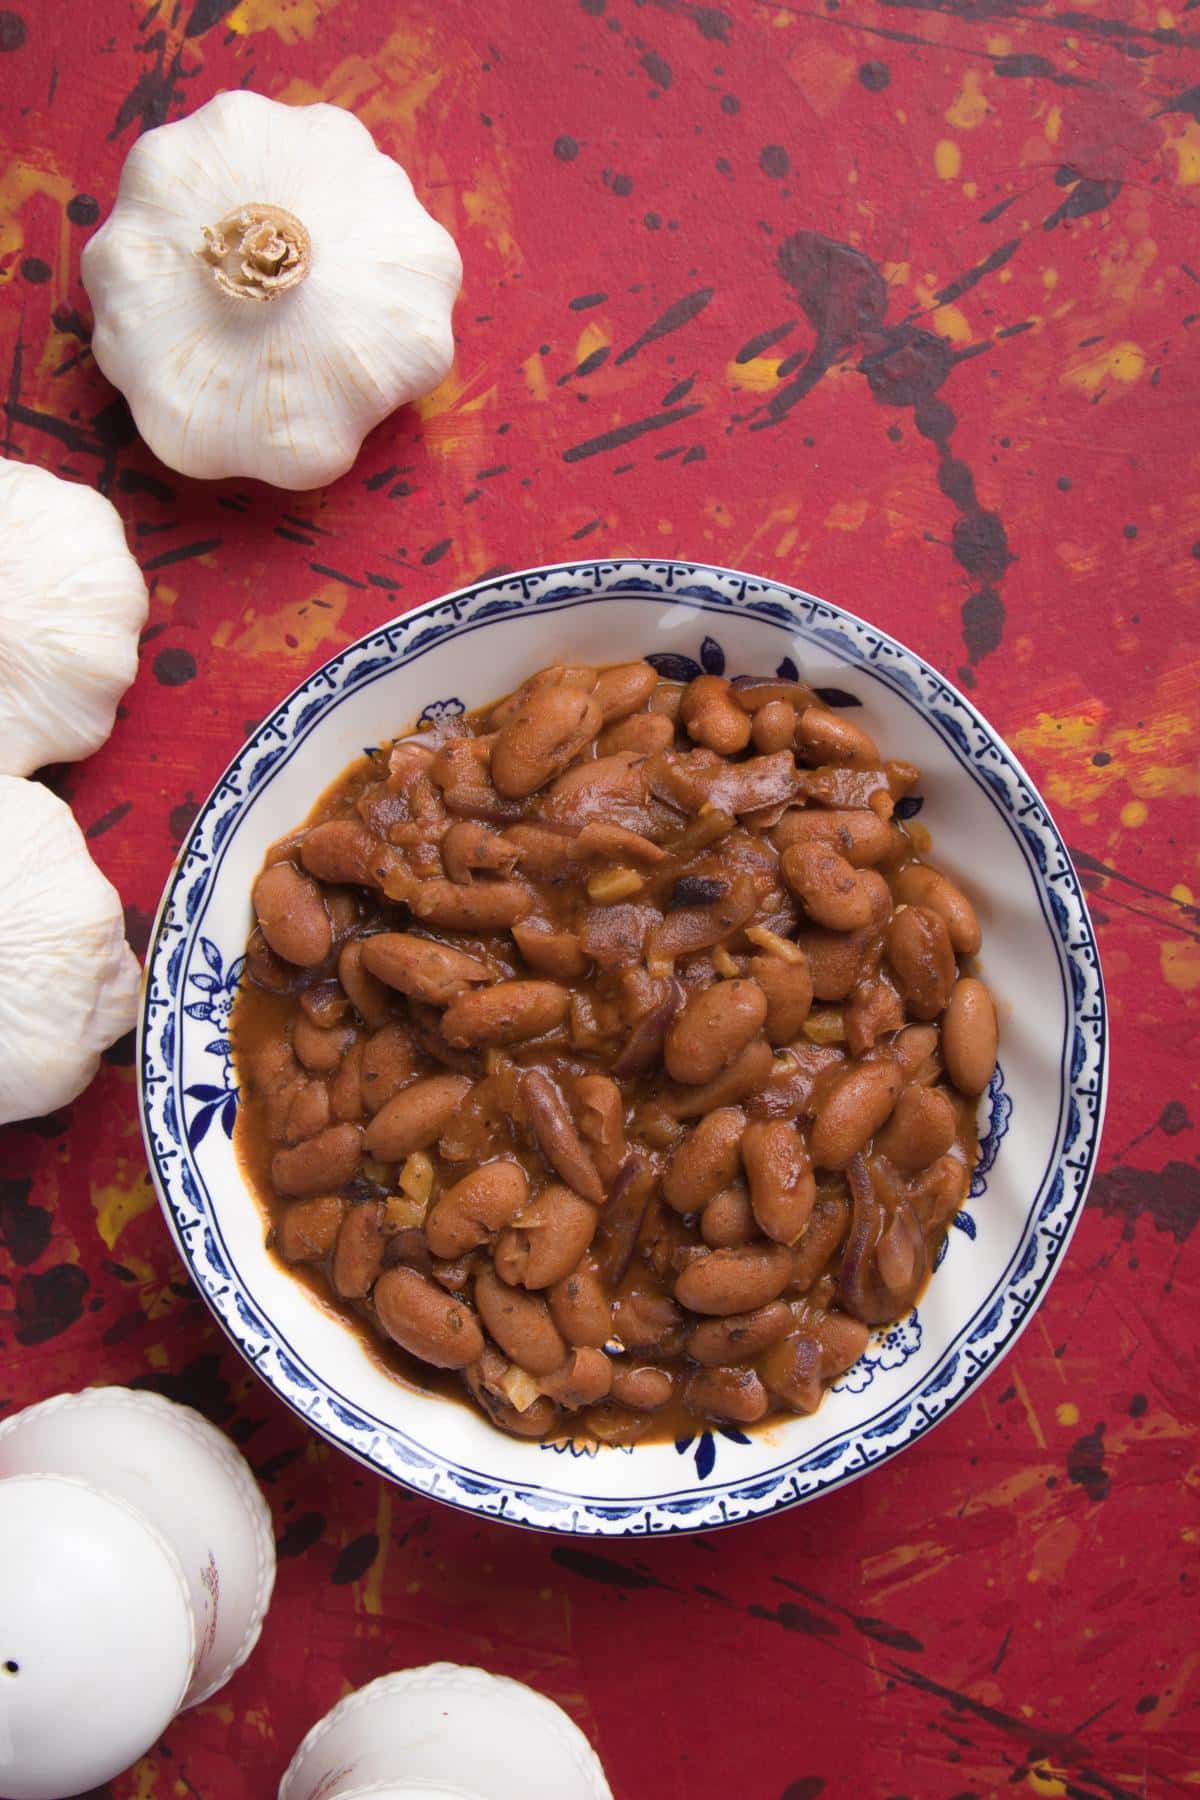 A bowl of cooked pinto beans next to a few bulbs of garlic.